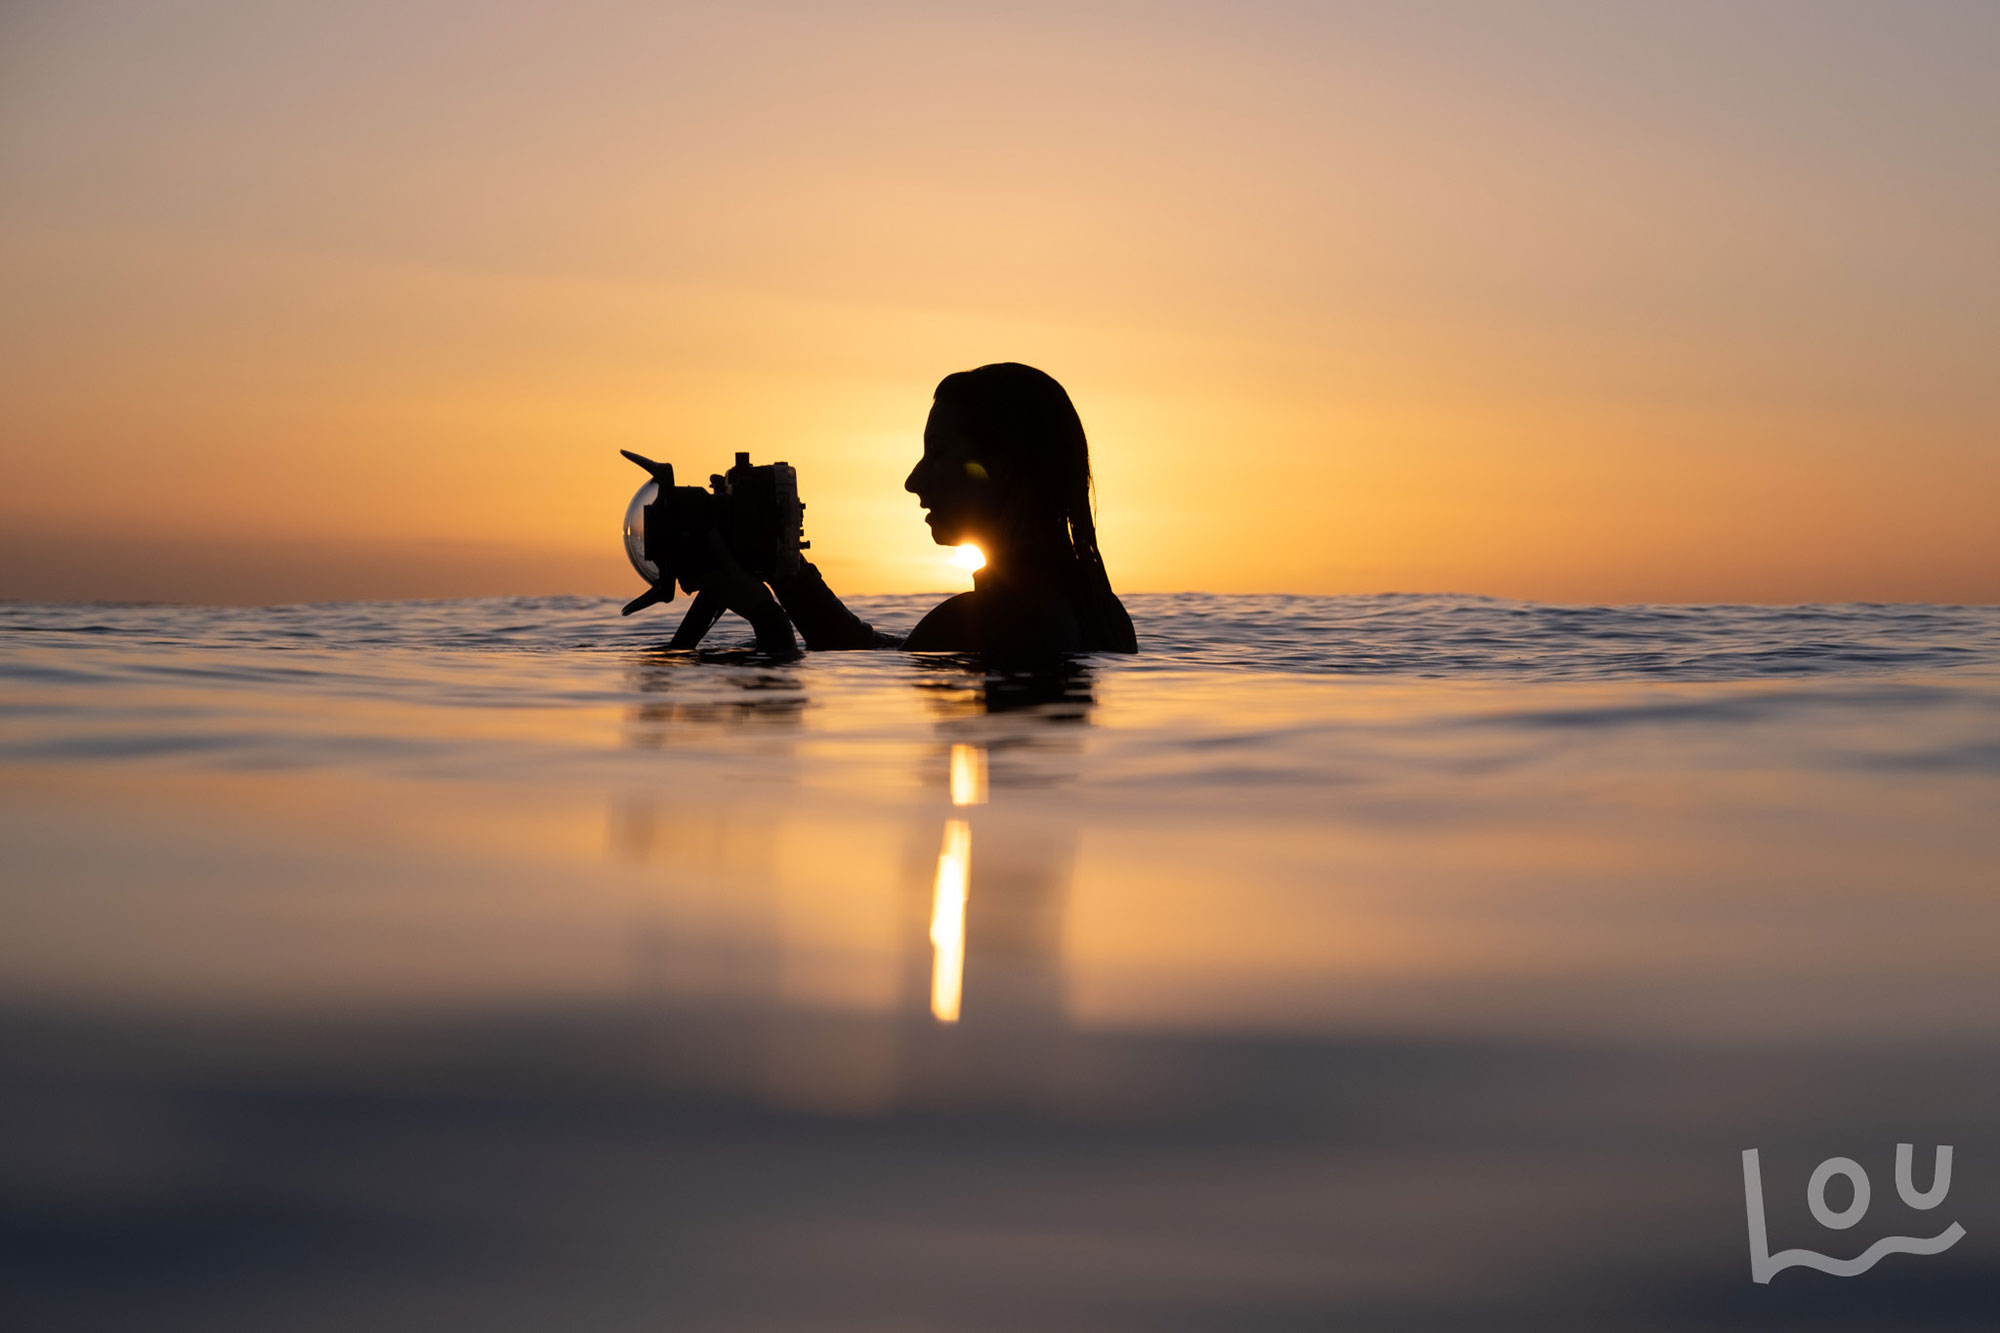 Saltwater Secrets: An insight into ocean and surf photography with Fuji